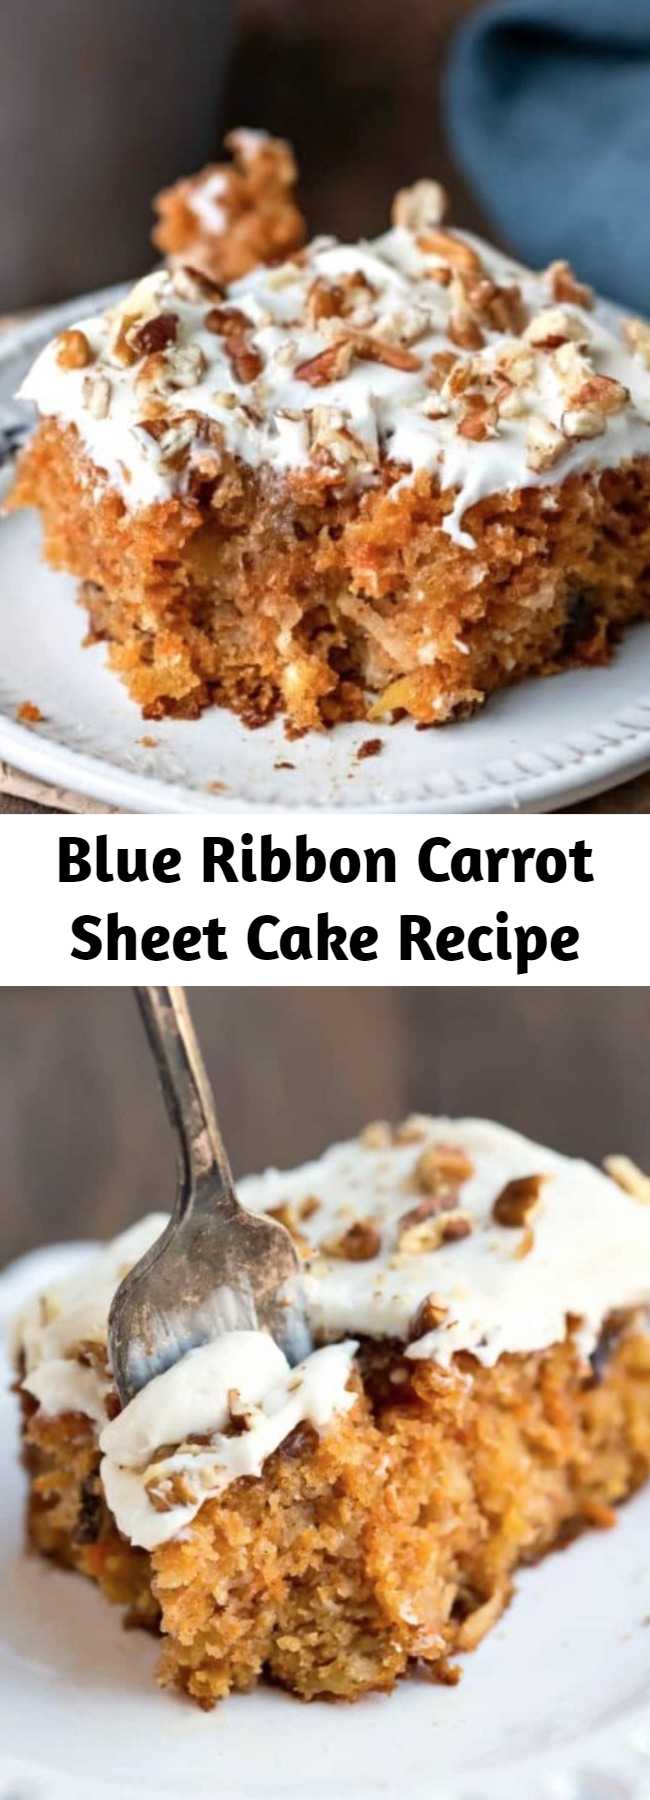 Blue Ribbon Carrot Sheet Cake Recipe - Best carrot cake recipe! Super moist, super delicious. Blue Ribbon Carrot Sheet Cake is a moist carrot sheet cake recipe that's topped with both a buttermilk glaze and rich cream cheese frosting!